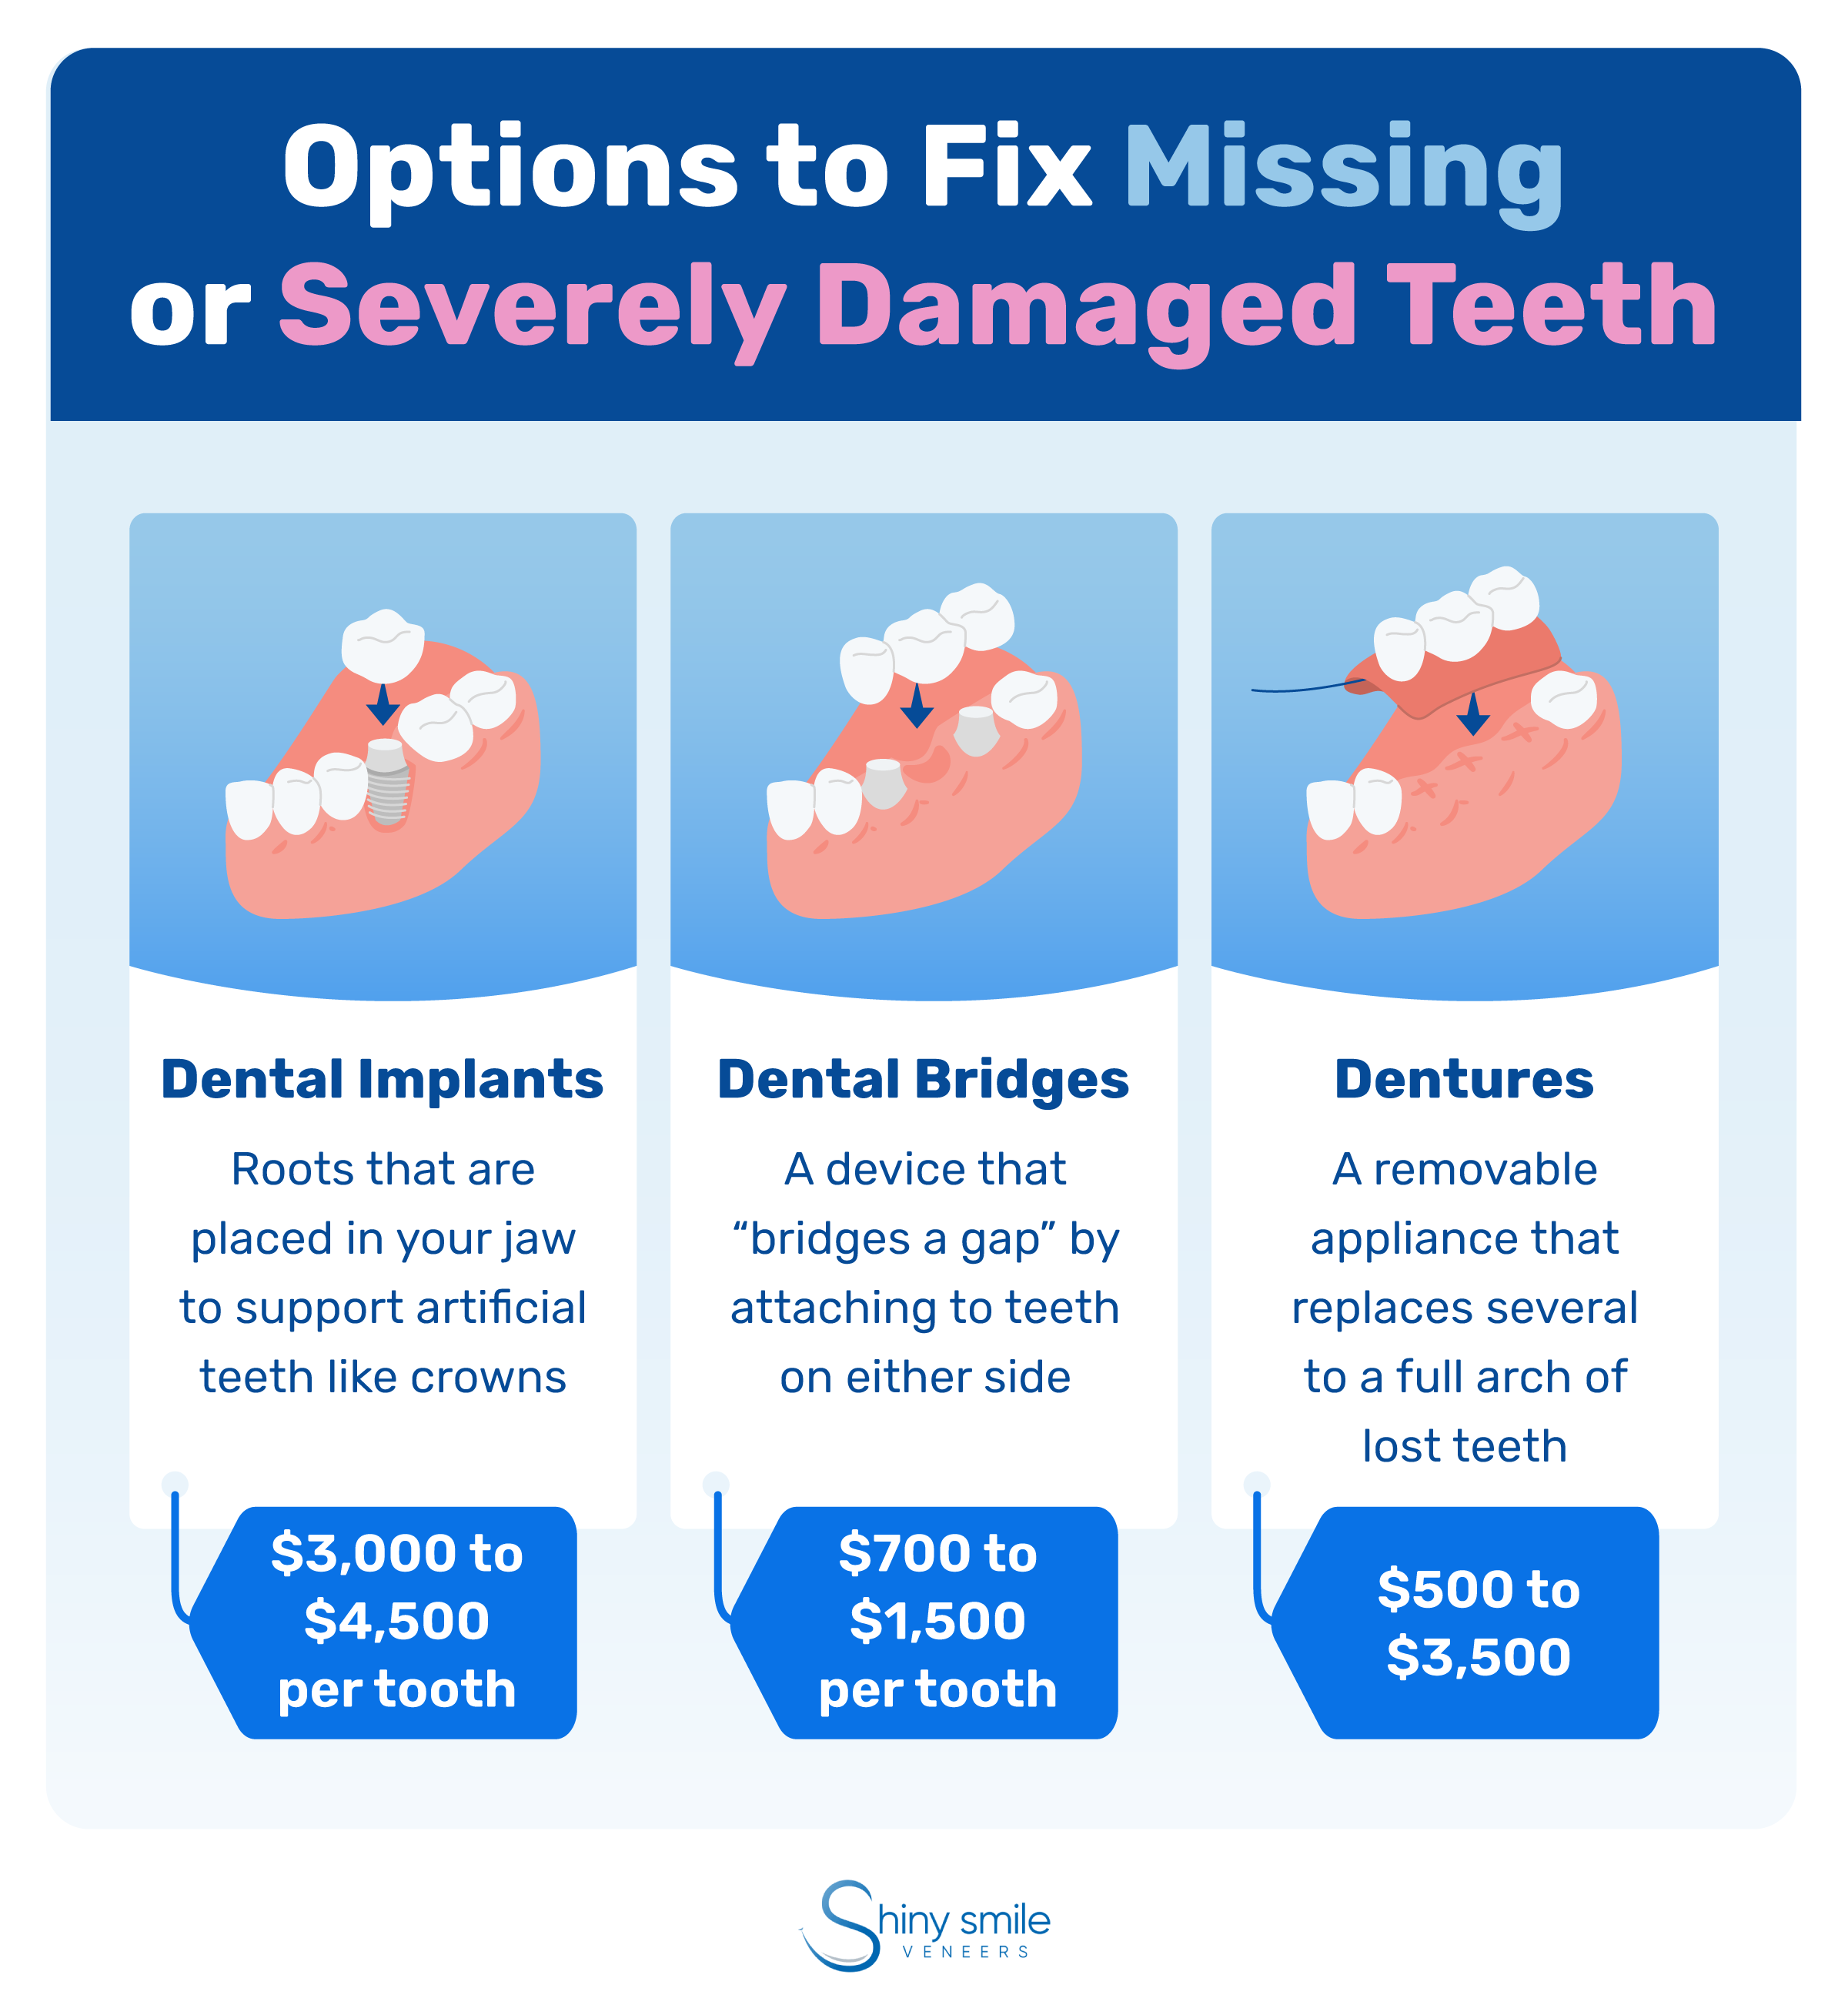 Options to fix missing teeth